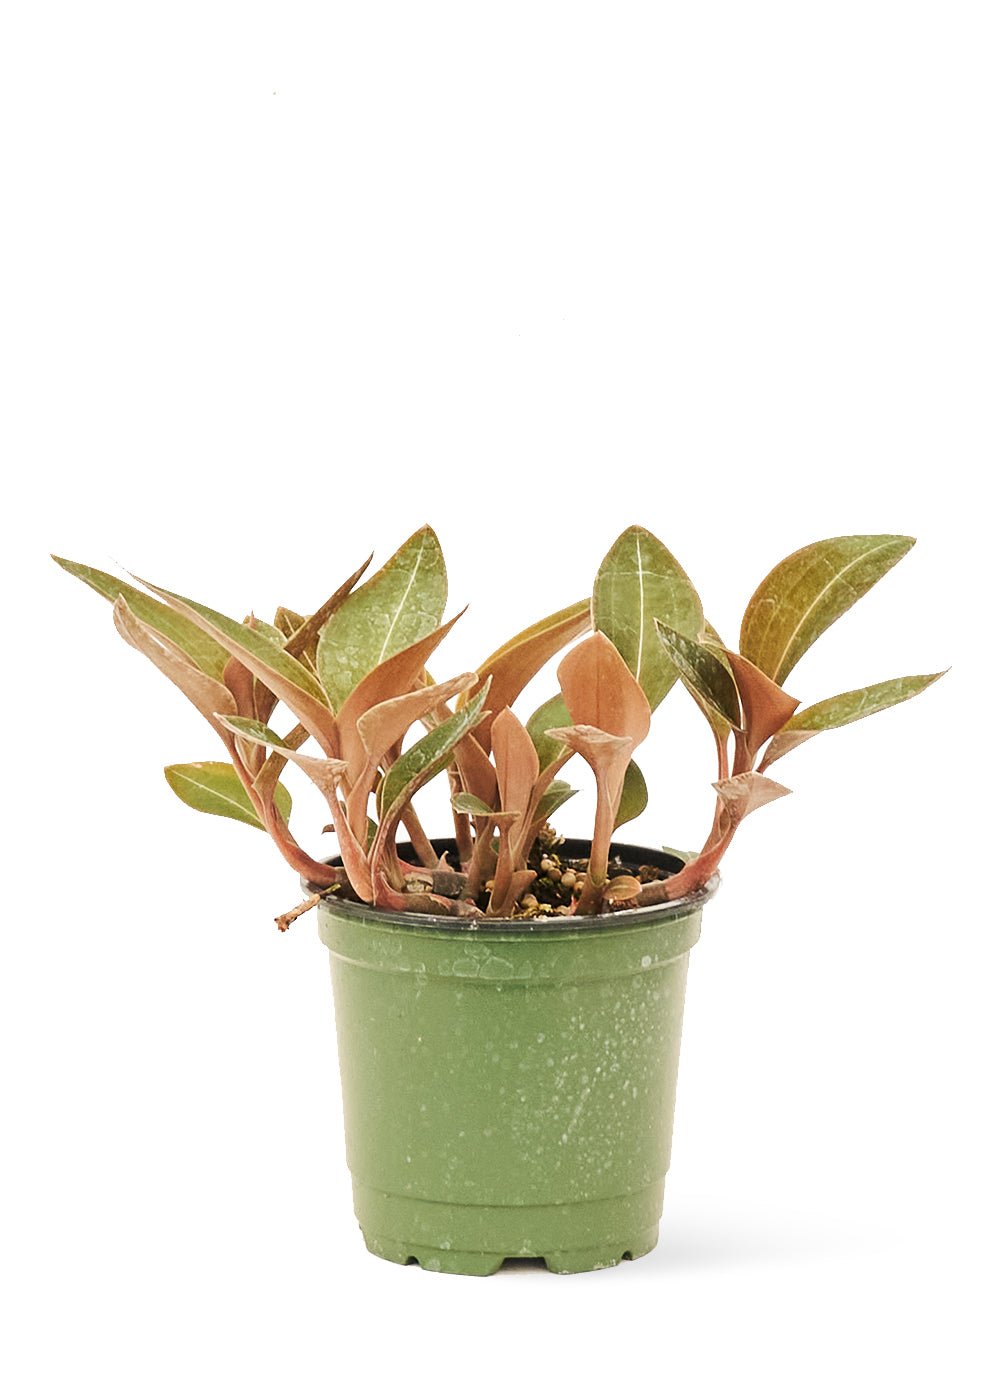 Jewel Orchid 'Discolor', Small - SunSwill Plant Shop